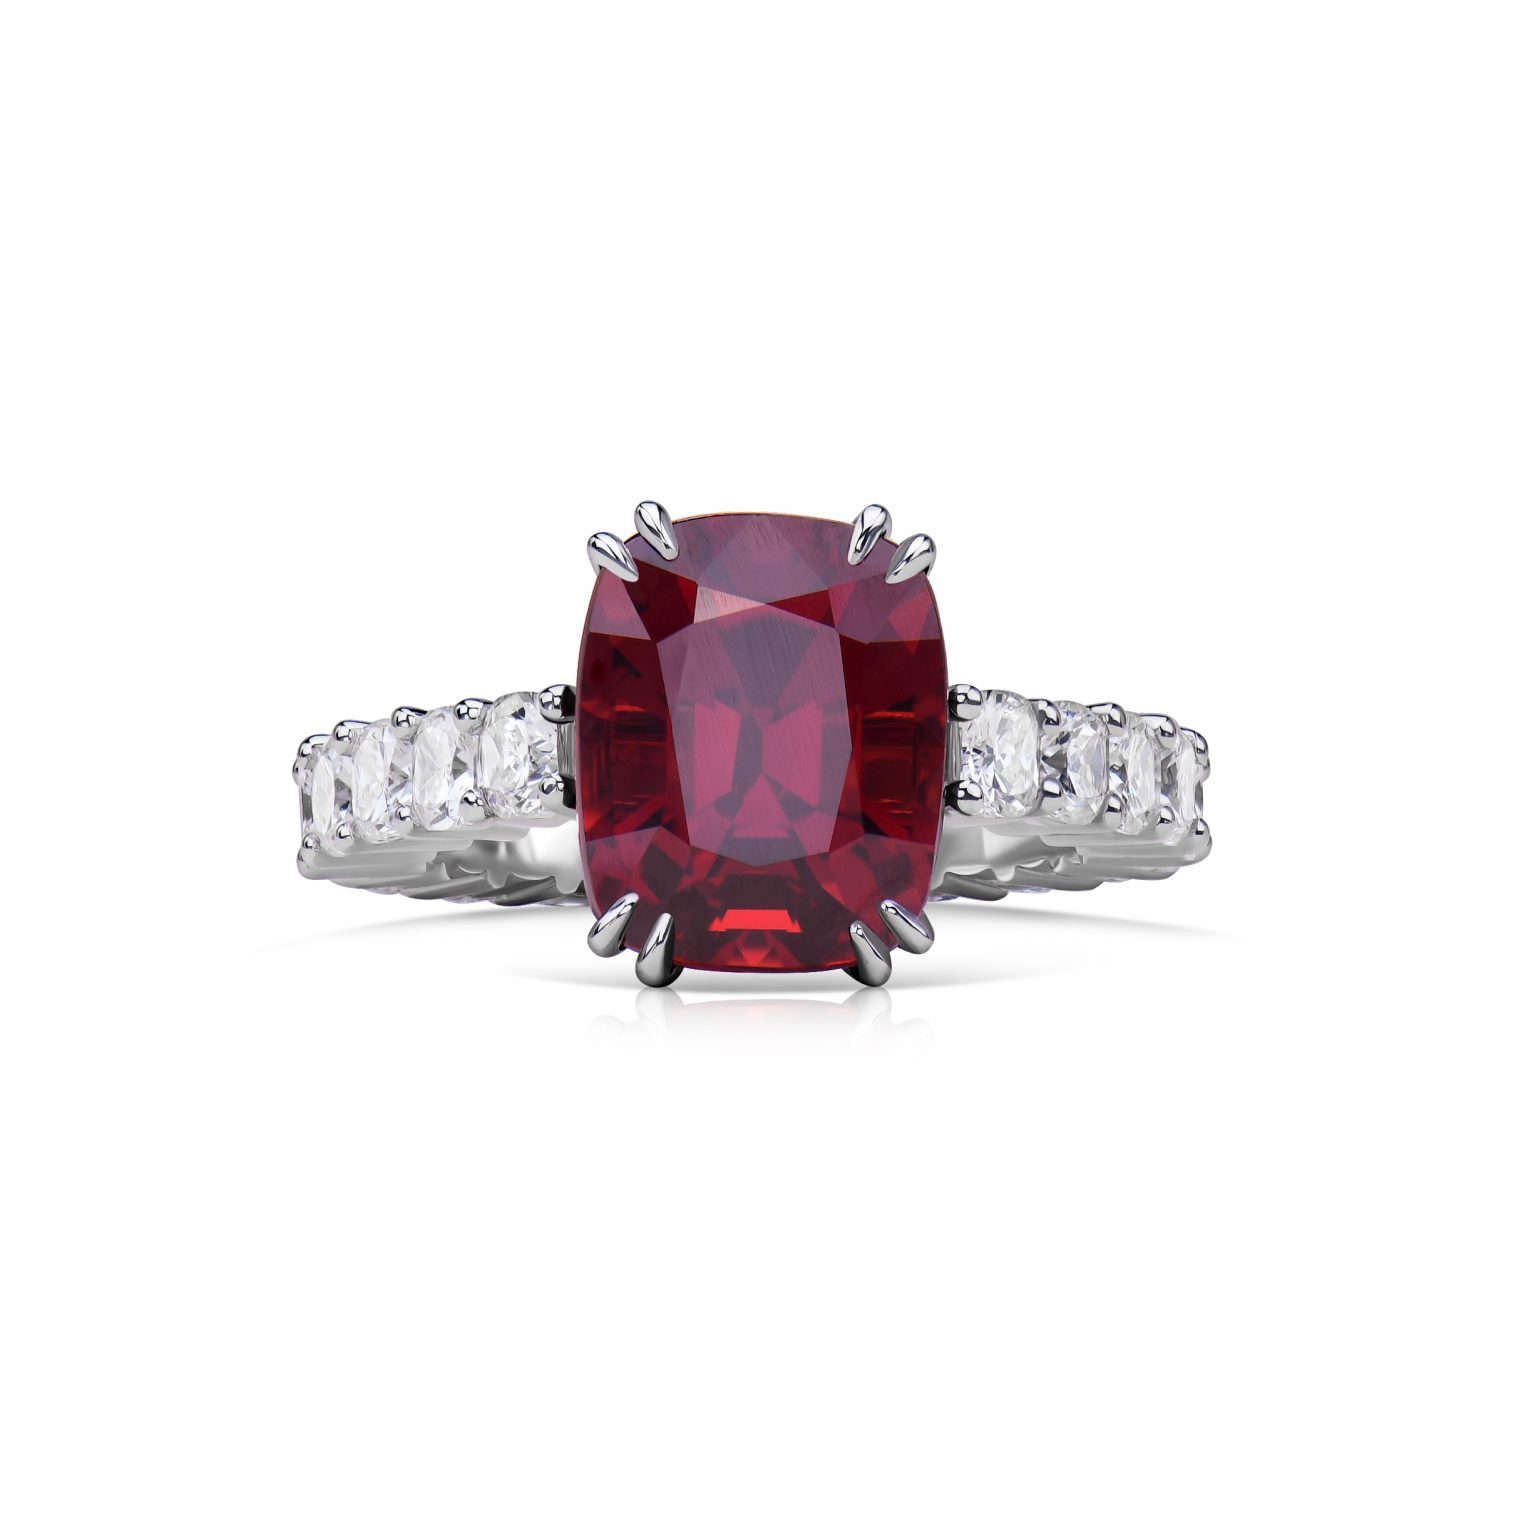 5.57 ct Cushion Cut Spinel and Diamond Ring